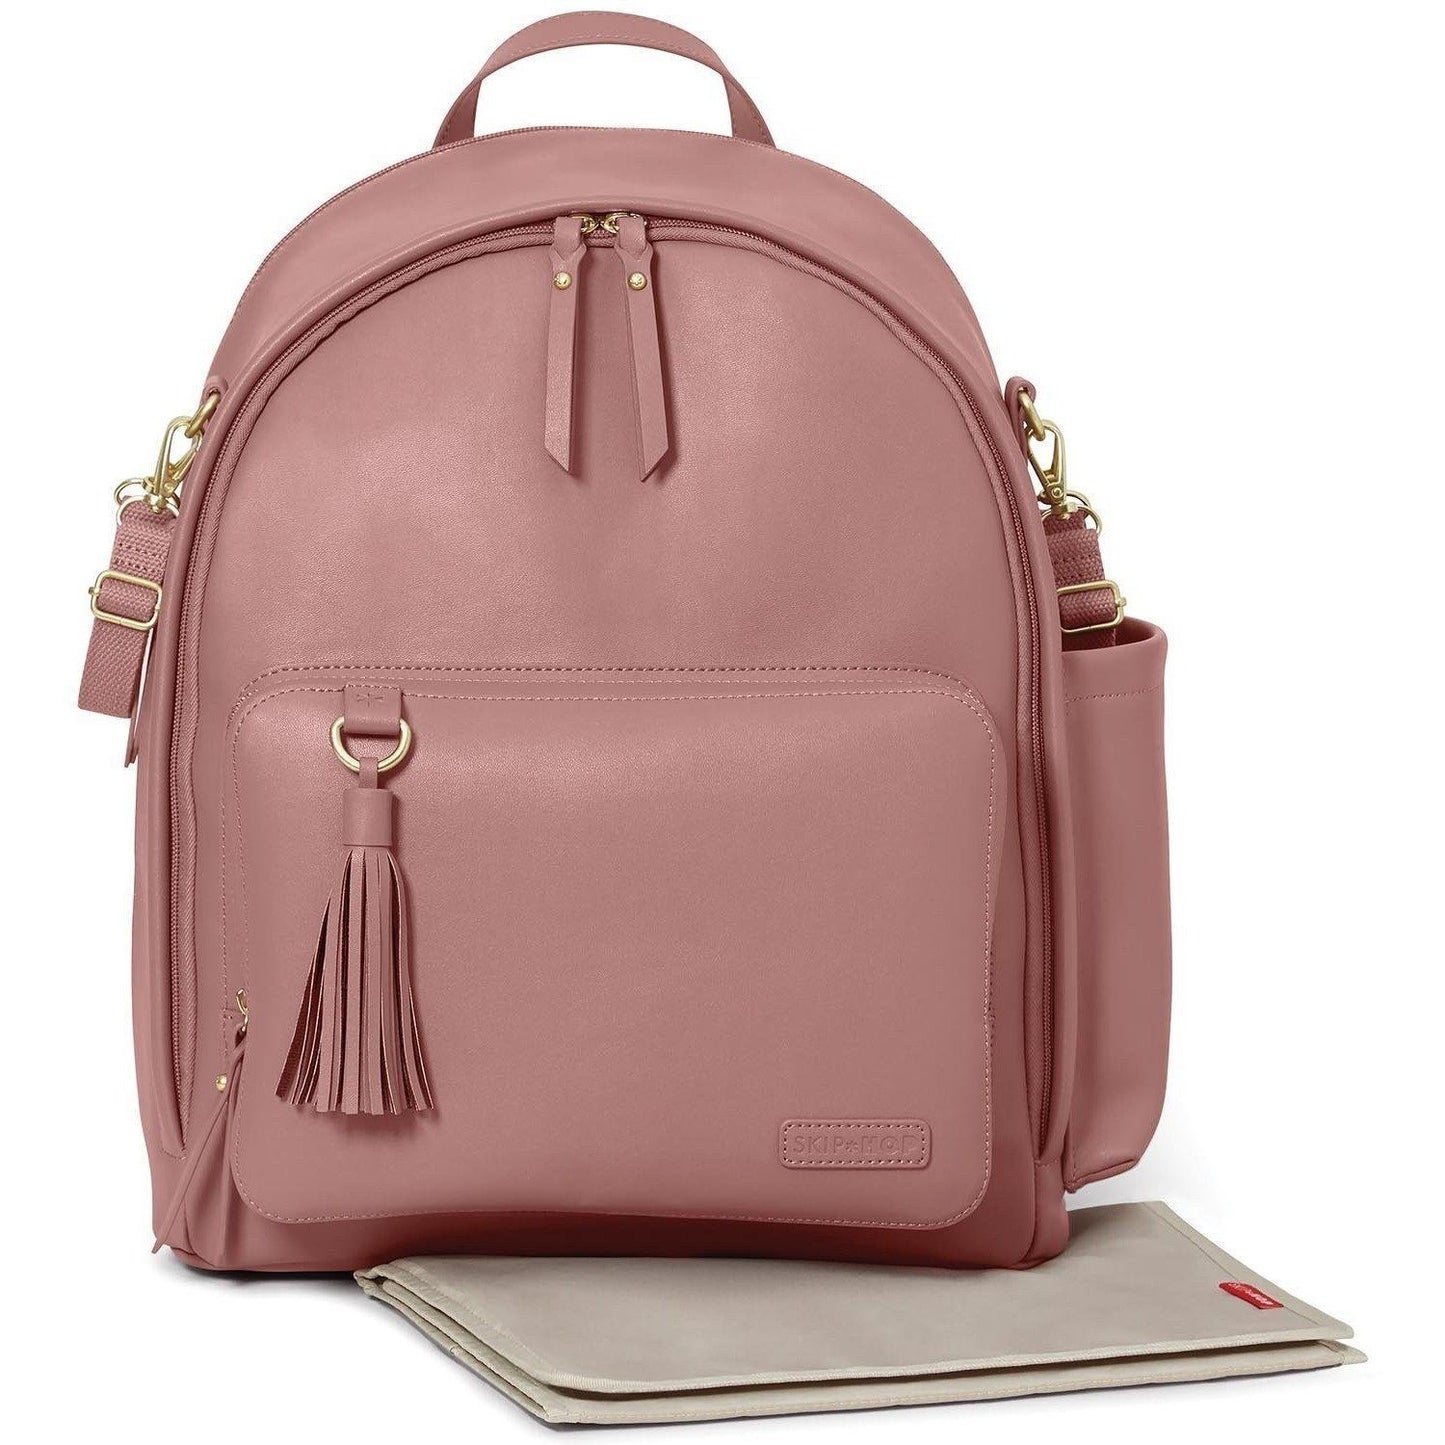 Skip Hop Mochila GREENWICH Simply Chic Anne Claire Baby Store Dusty Rose 